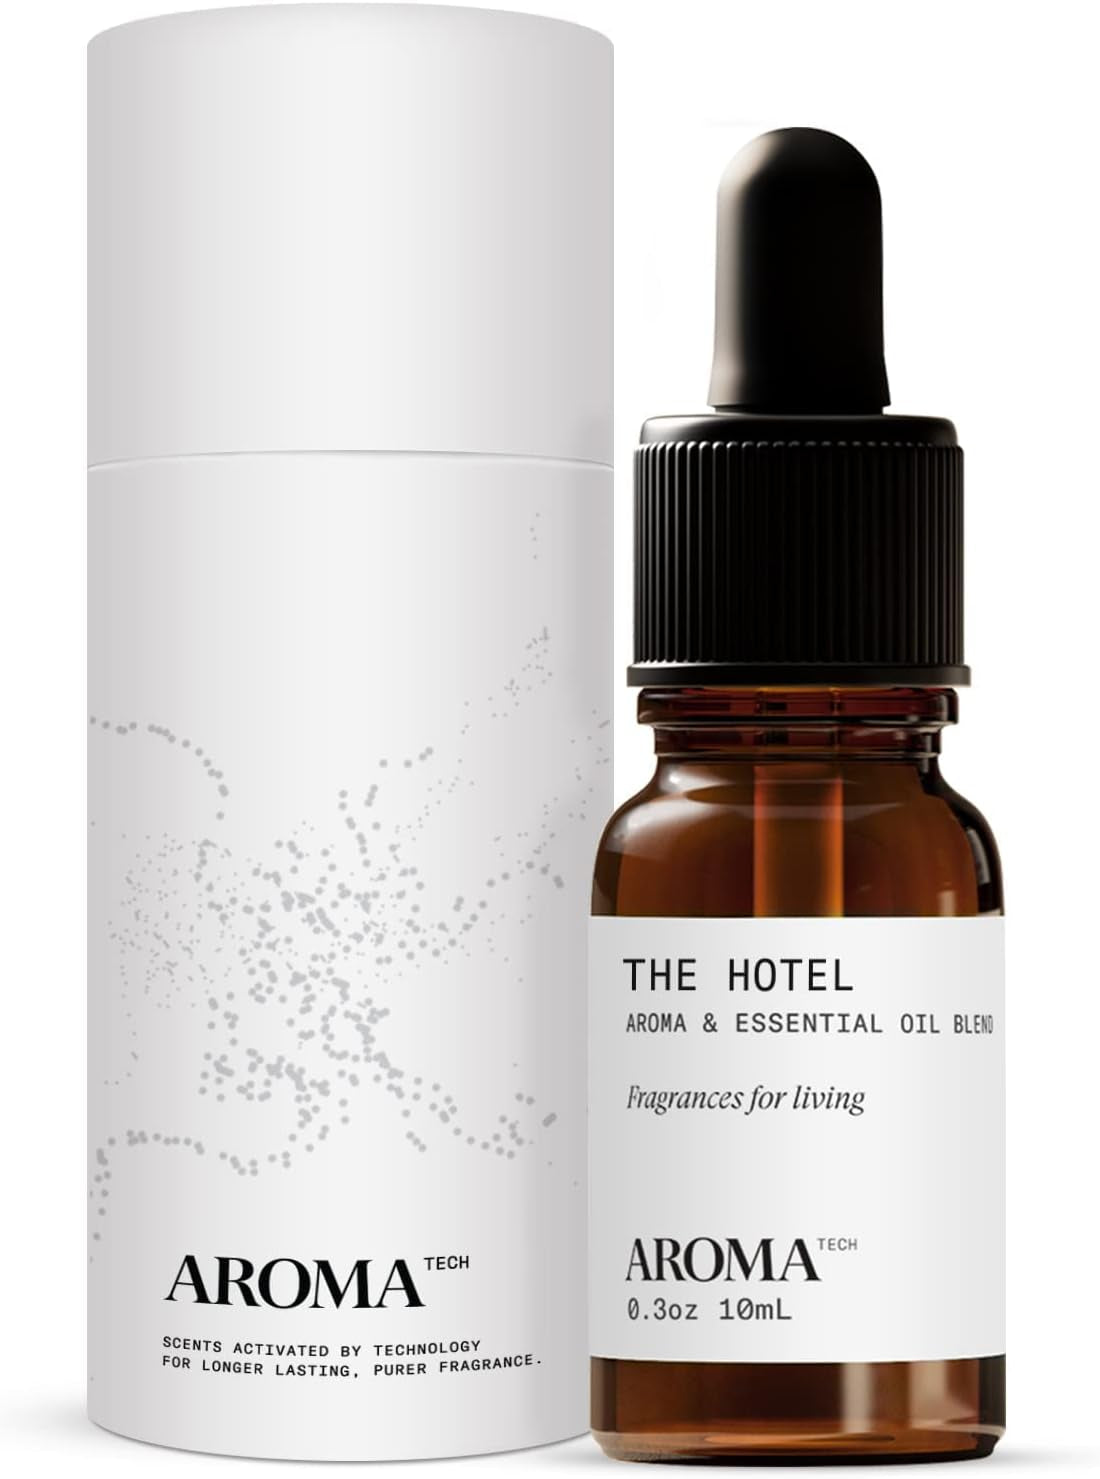 the Hotel Aroma Essential Oil Blend Stocking Stuffers, Aromatherapy Diffuser Oil, Holiday Gifts with Peach, Lavender & Pine, for Diffuser, Humidifier - 0.3 Fl Oz, 10 Ml